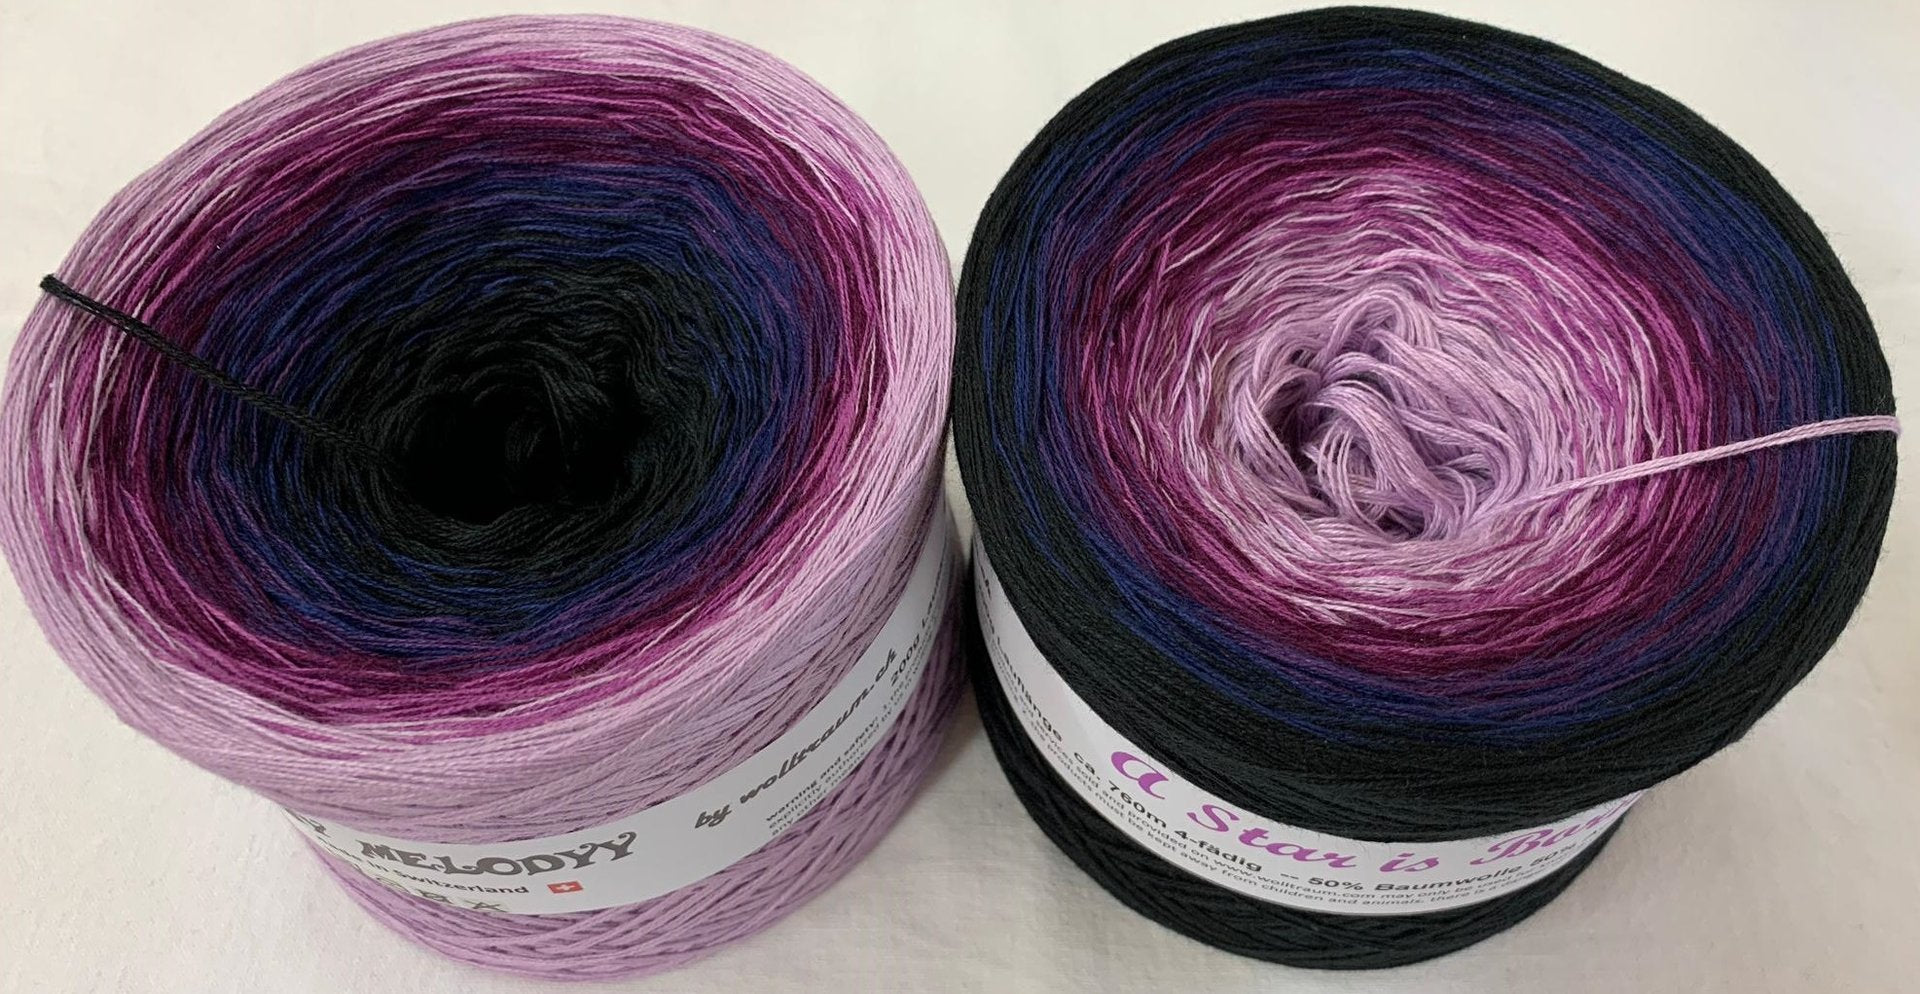 Two Wolltraum gradient yarn cakes in the colourway A Star is Born.  They go from light purple to black.